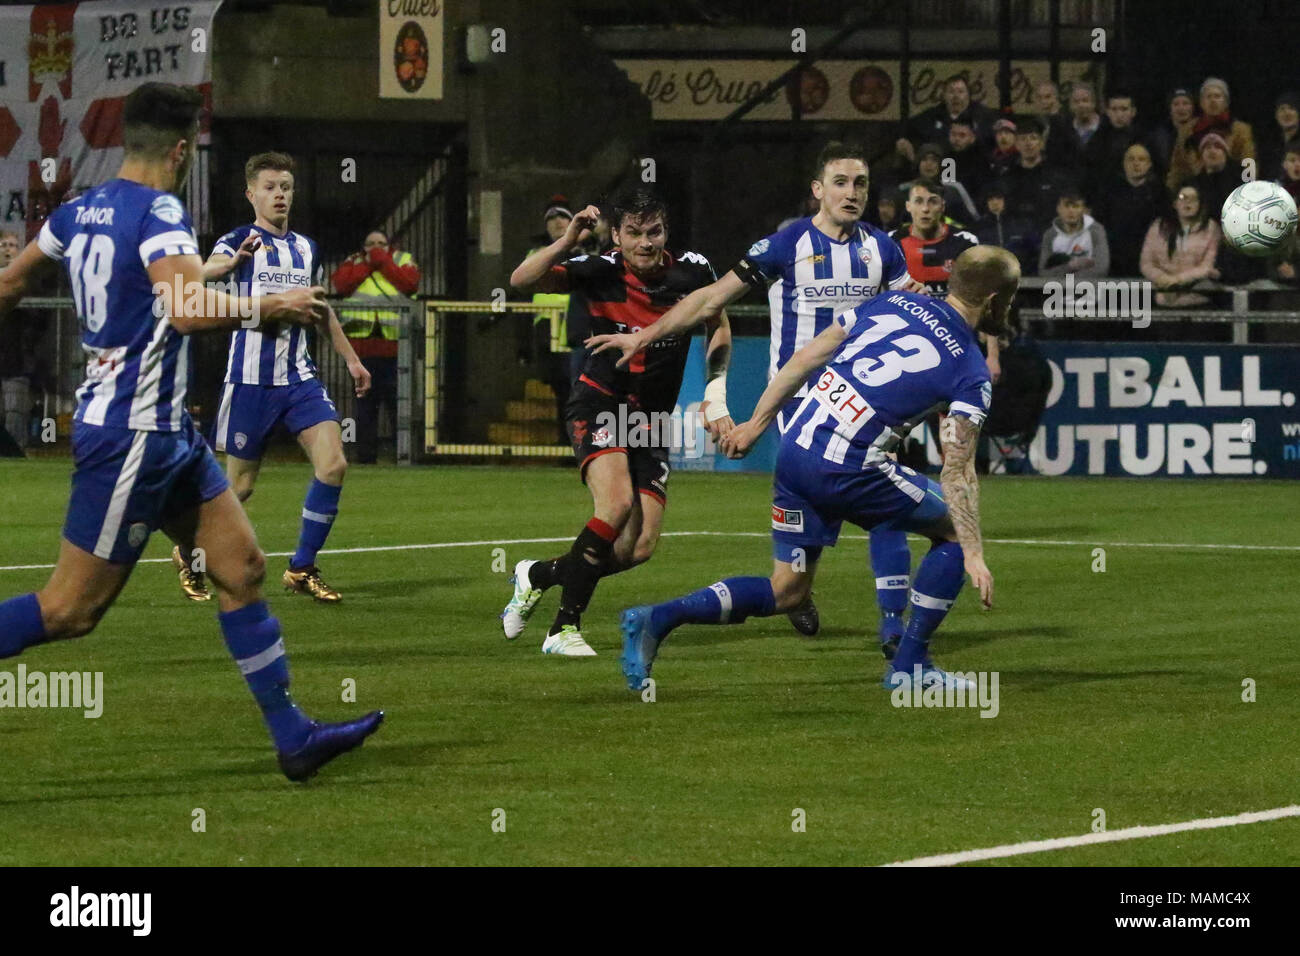 Seaview, Belfast, Northern Ireland, UK. 03 April 2018. Danske Bank Premiership - Crusaders 1 Coleraine 1. In tonight's top of the table clash at a packed Seaview, Crusaders drew 1-1 with Coleraine. The draw keeps Crusaders top of the league, two points ahead of Coleraine with four games to play. Crusaders Philip Lowry (7) fires in a shot. Credit: David Hunter/Alamy Live News. Stock Photo